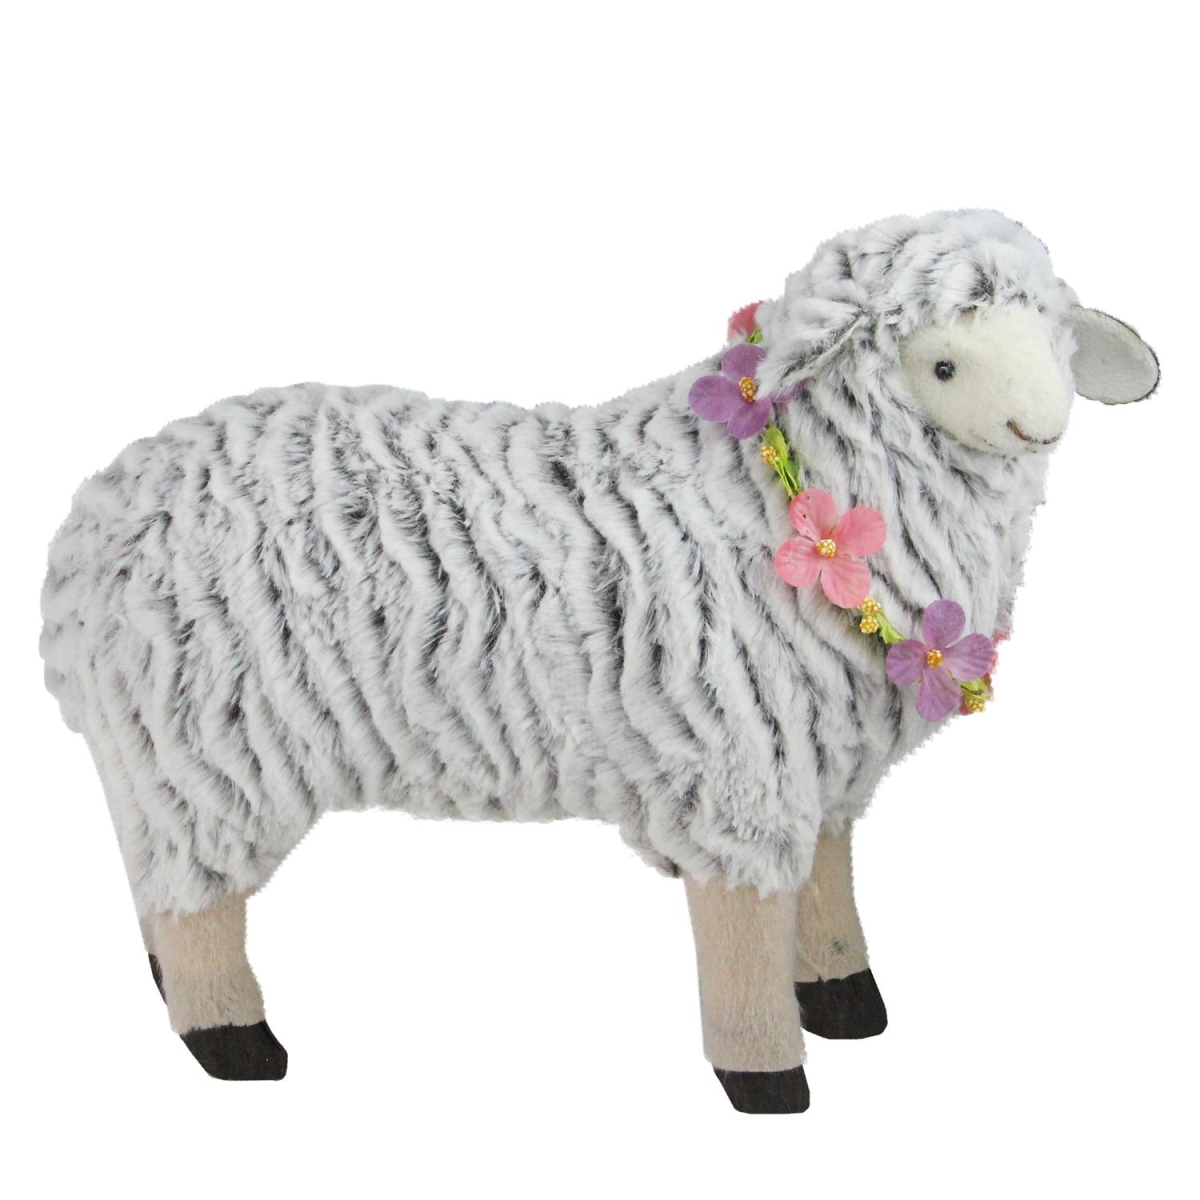 32728977 13 In. White & Brown Plush Standing Sheep Spring Easter Figure